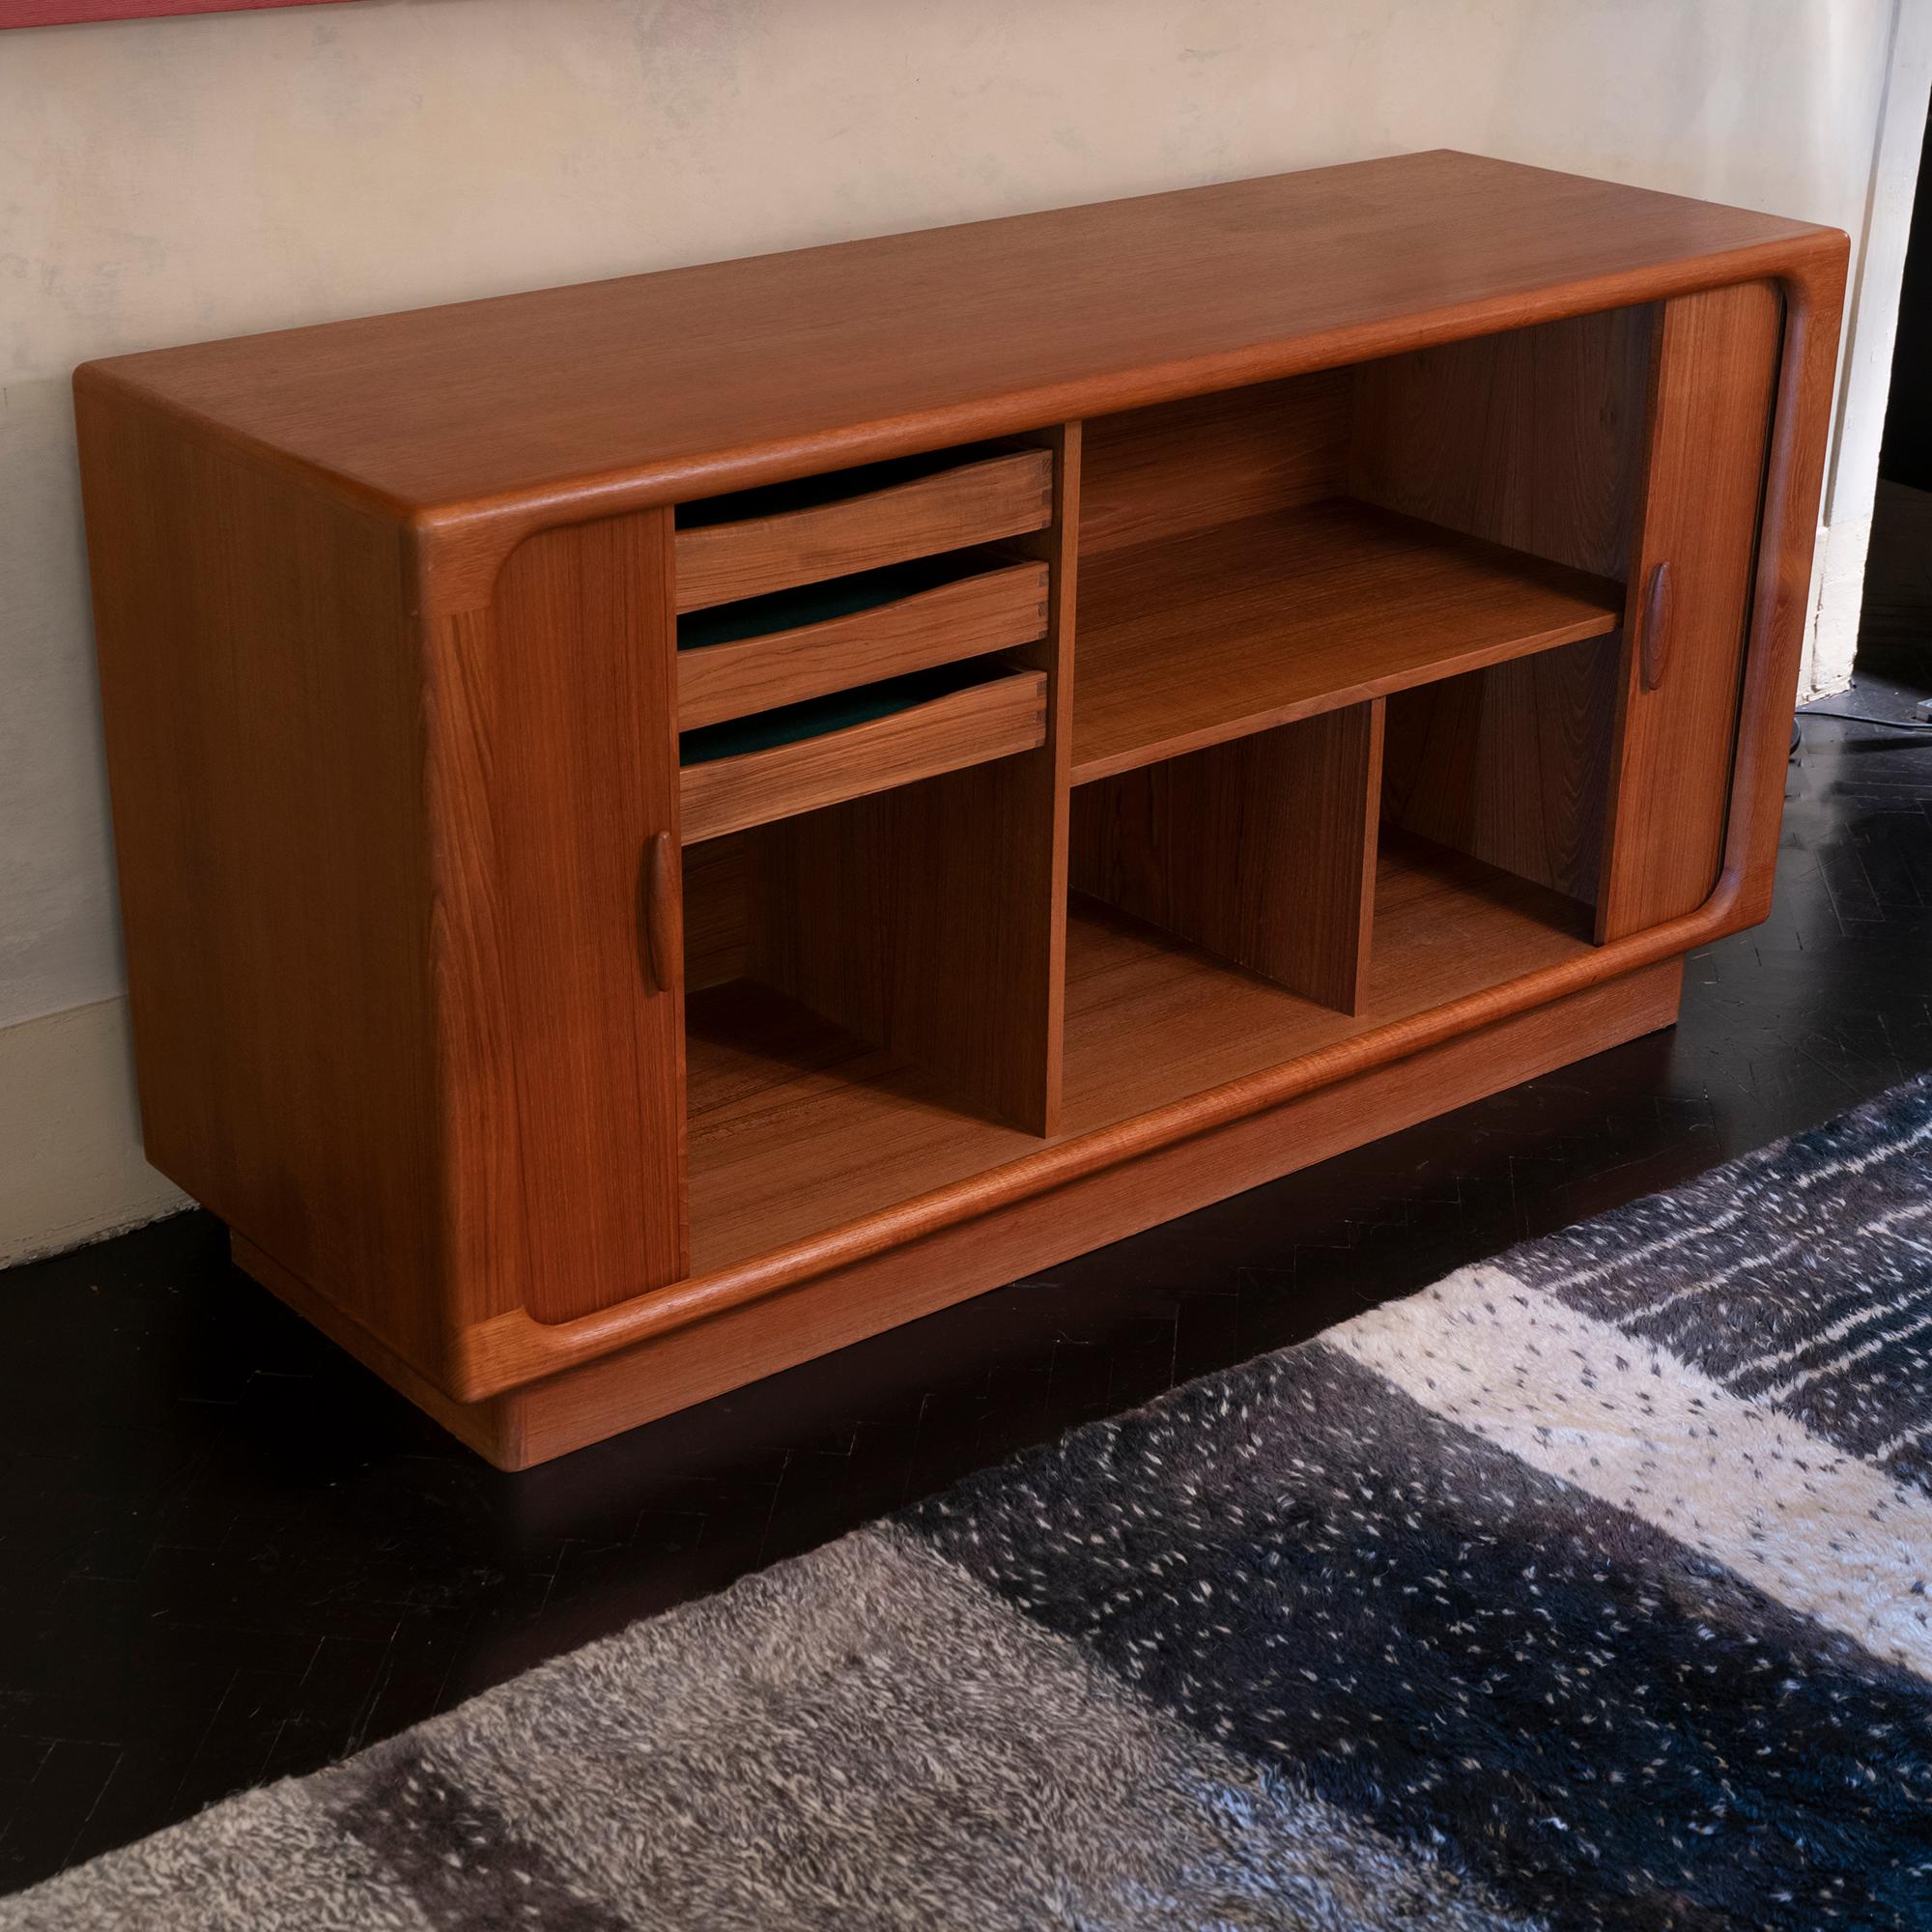 Danish design credenza or sideboard designed and produced by Dyrlund furniture makers in the 1960s, the organic shaped wood structure, two tambour doors that disappear completely when opened.
The interior has 3 drawers and fixed shelves, slight